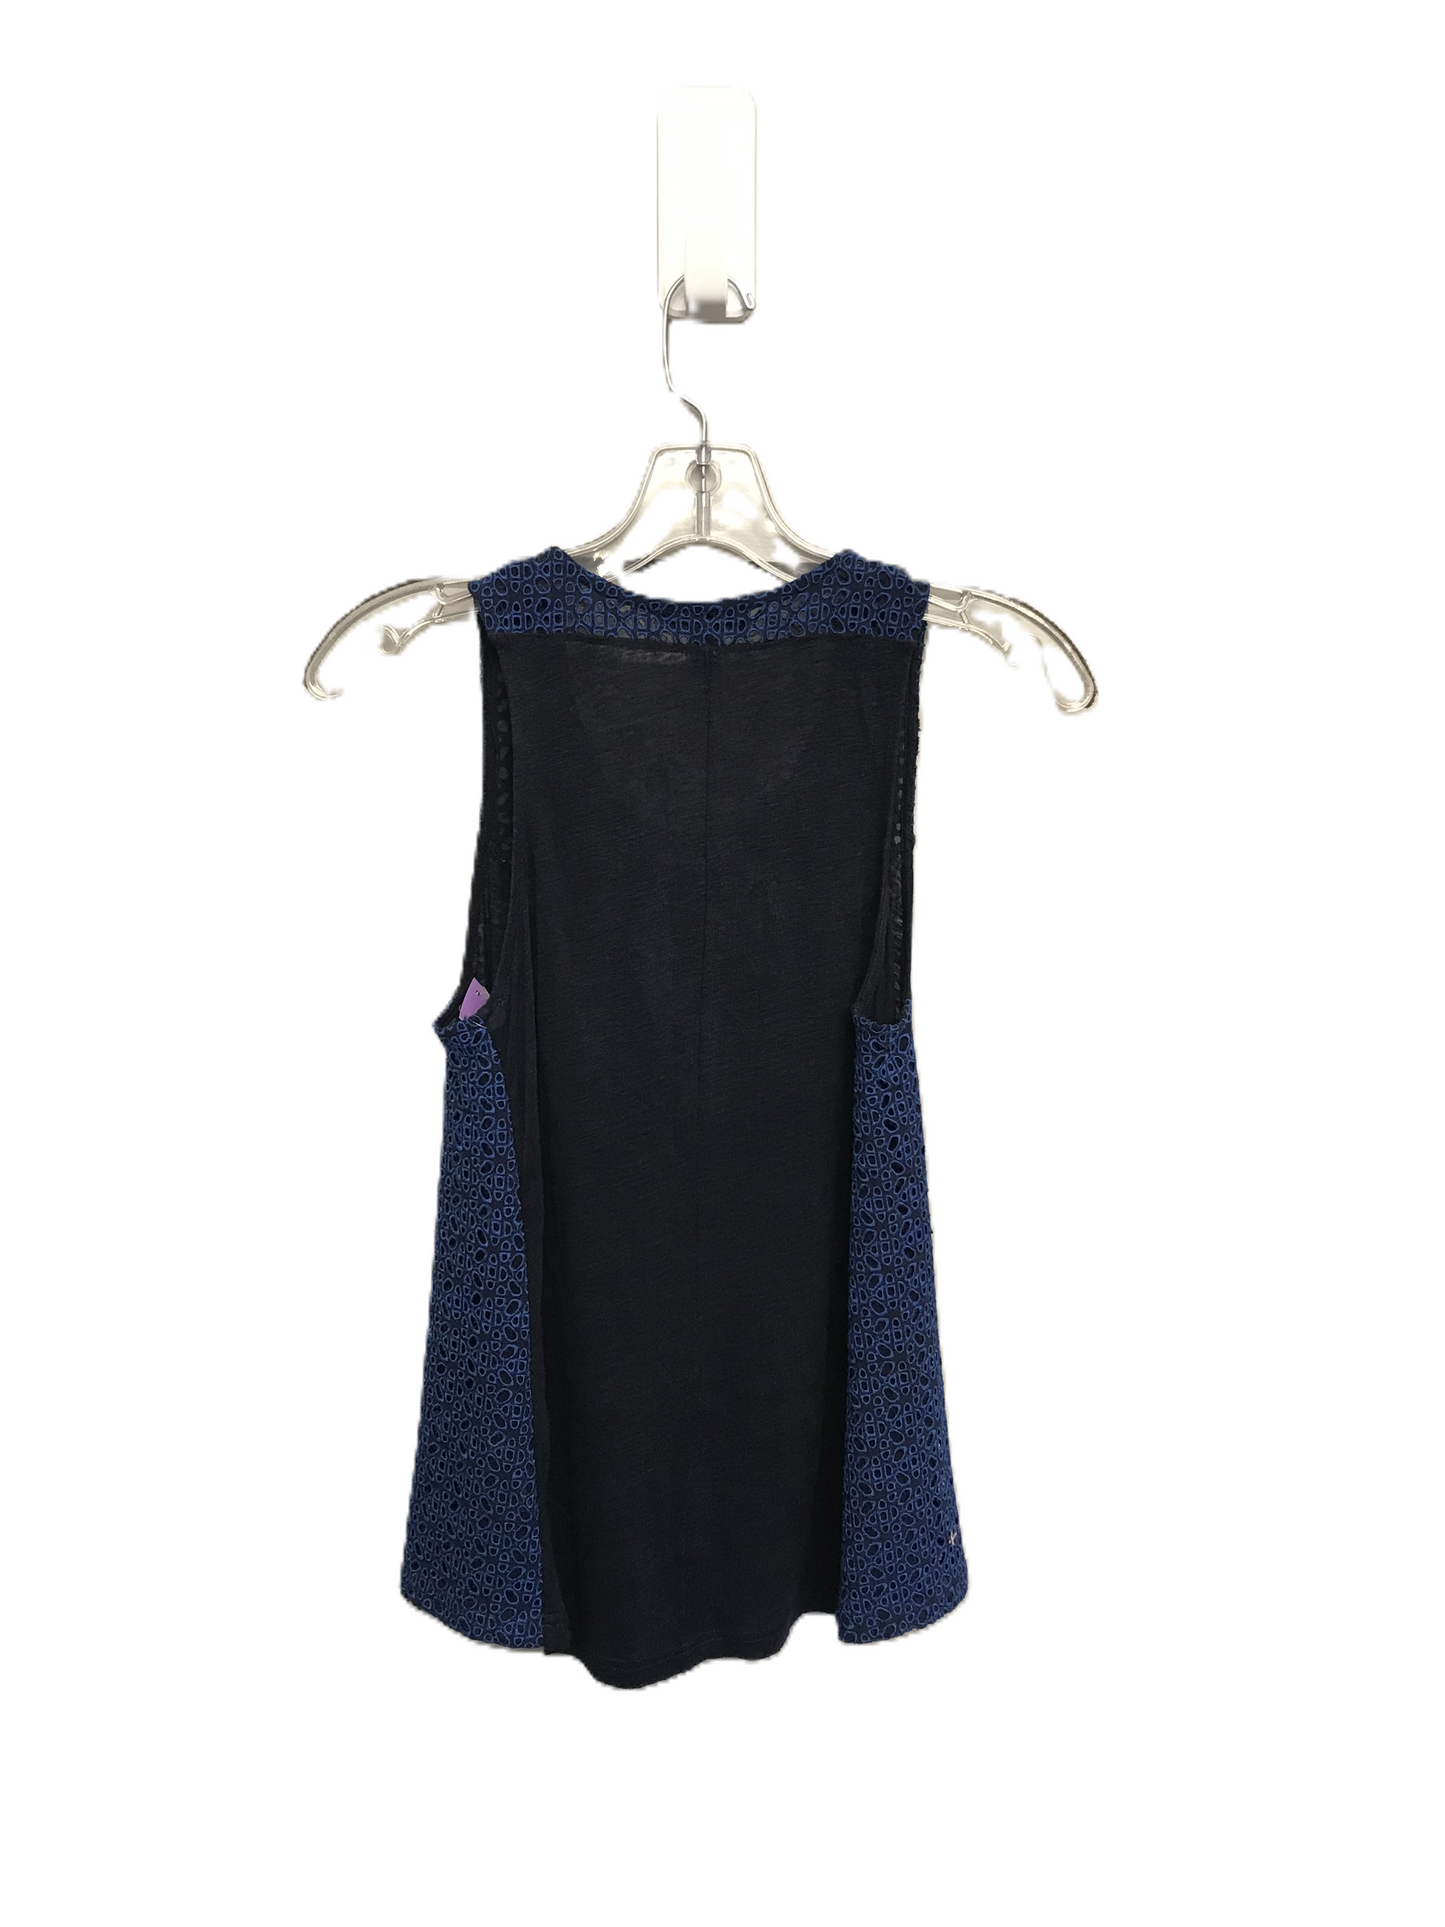 Blue Top Sleeveless By J. Crew, Size: S